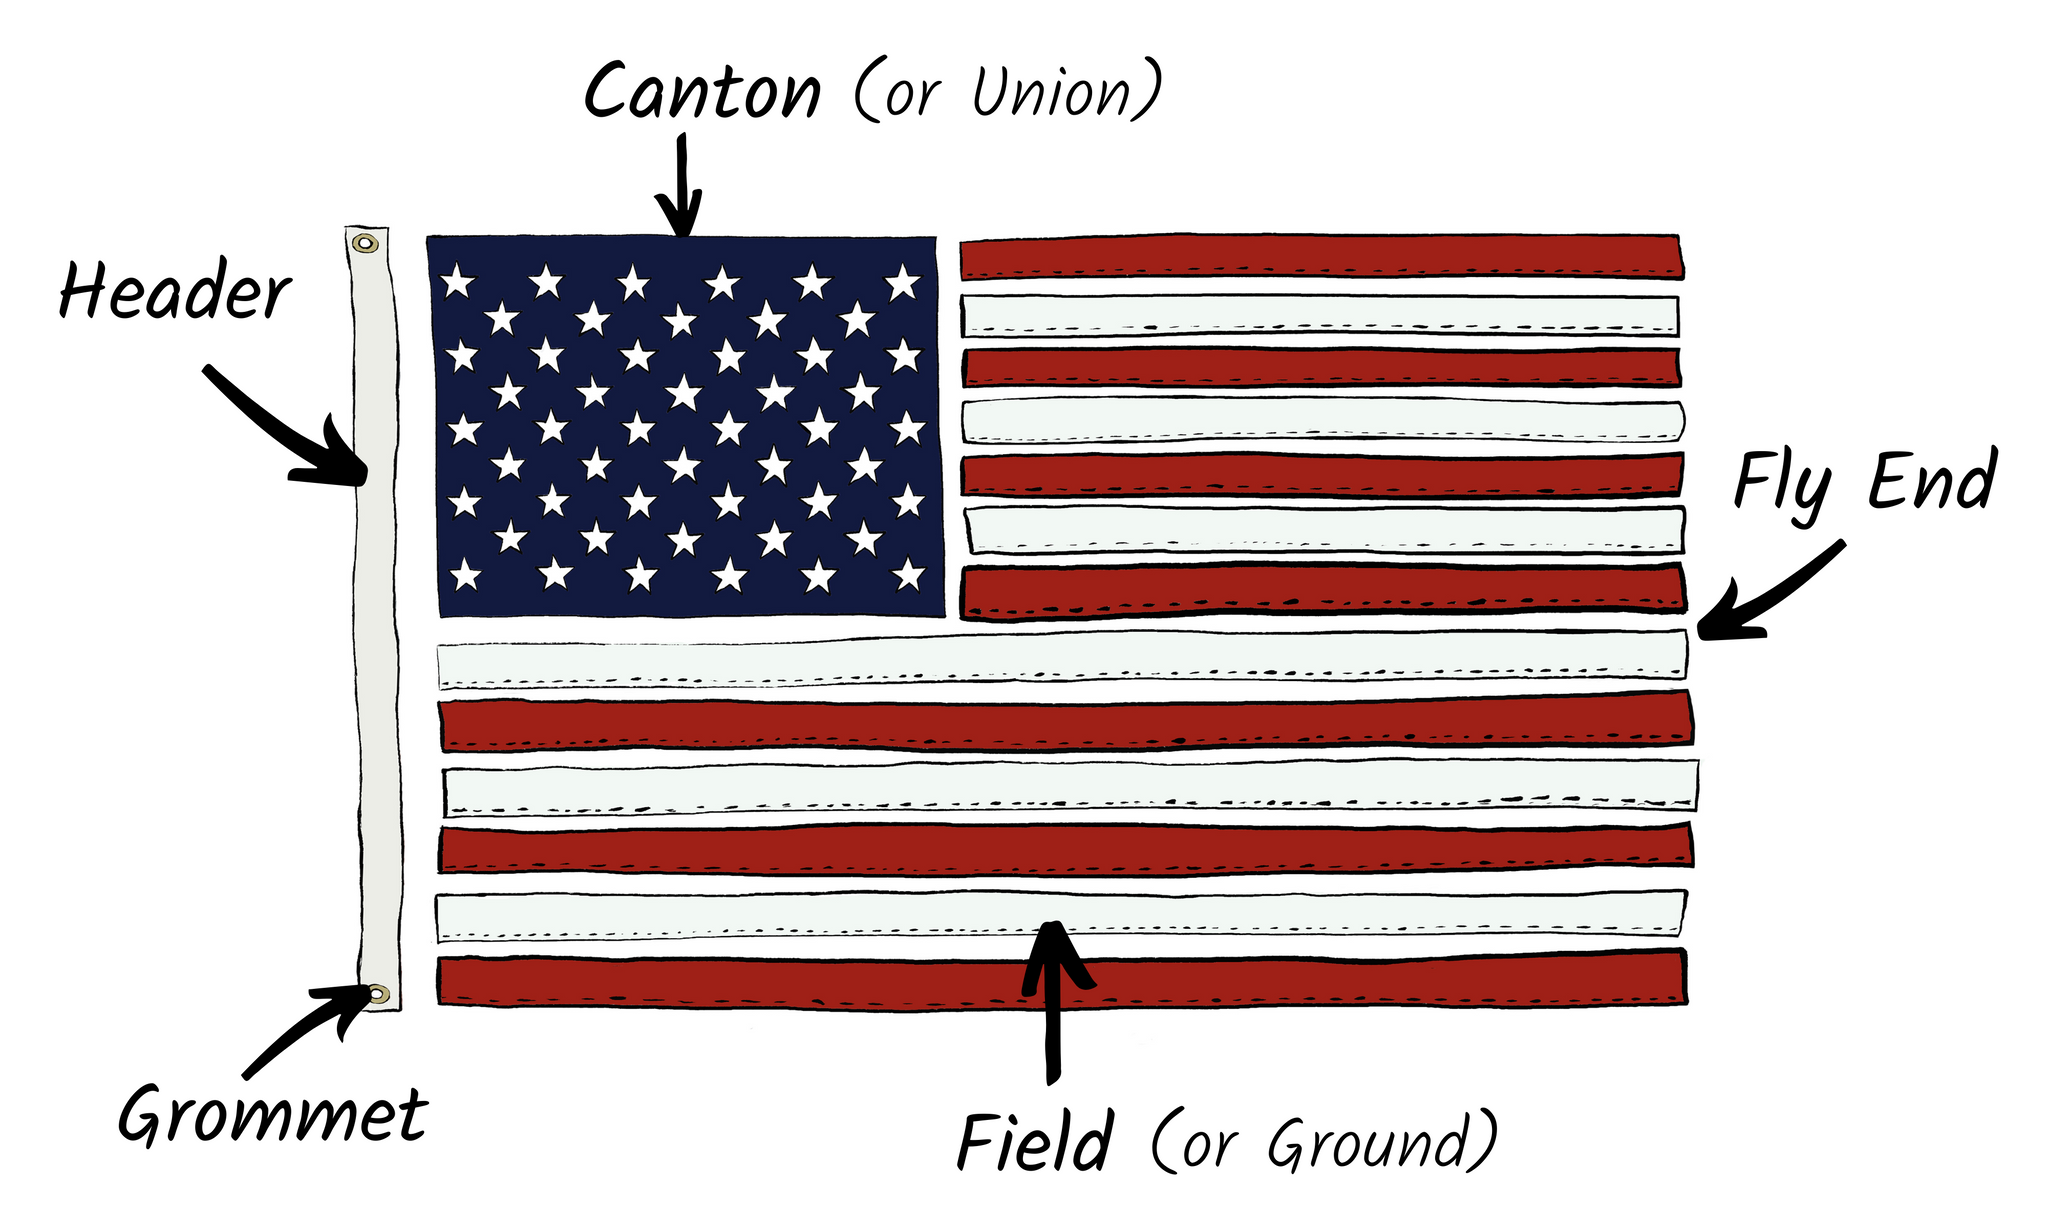 Why are there 7 red stripes on the flag?